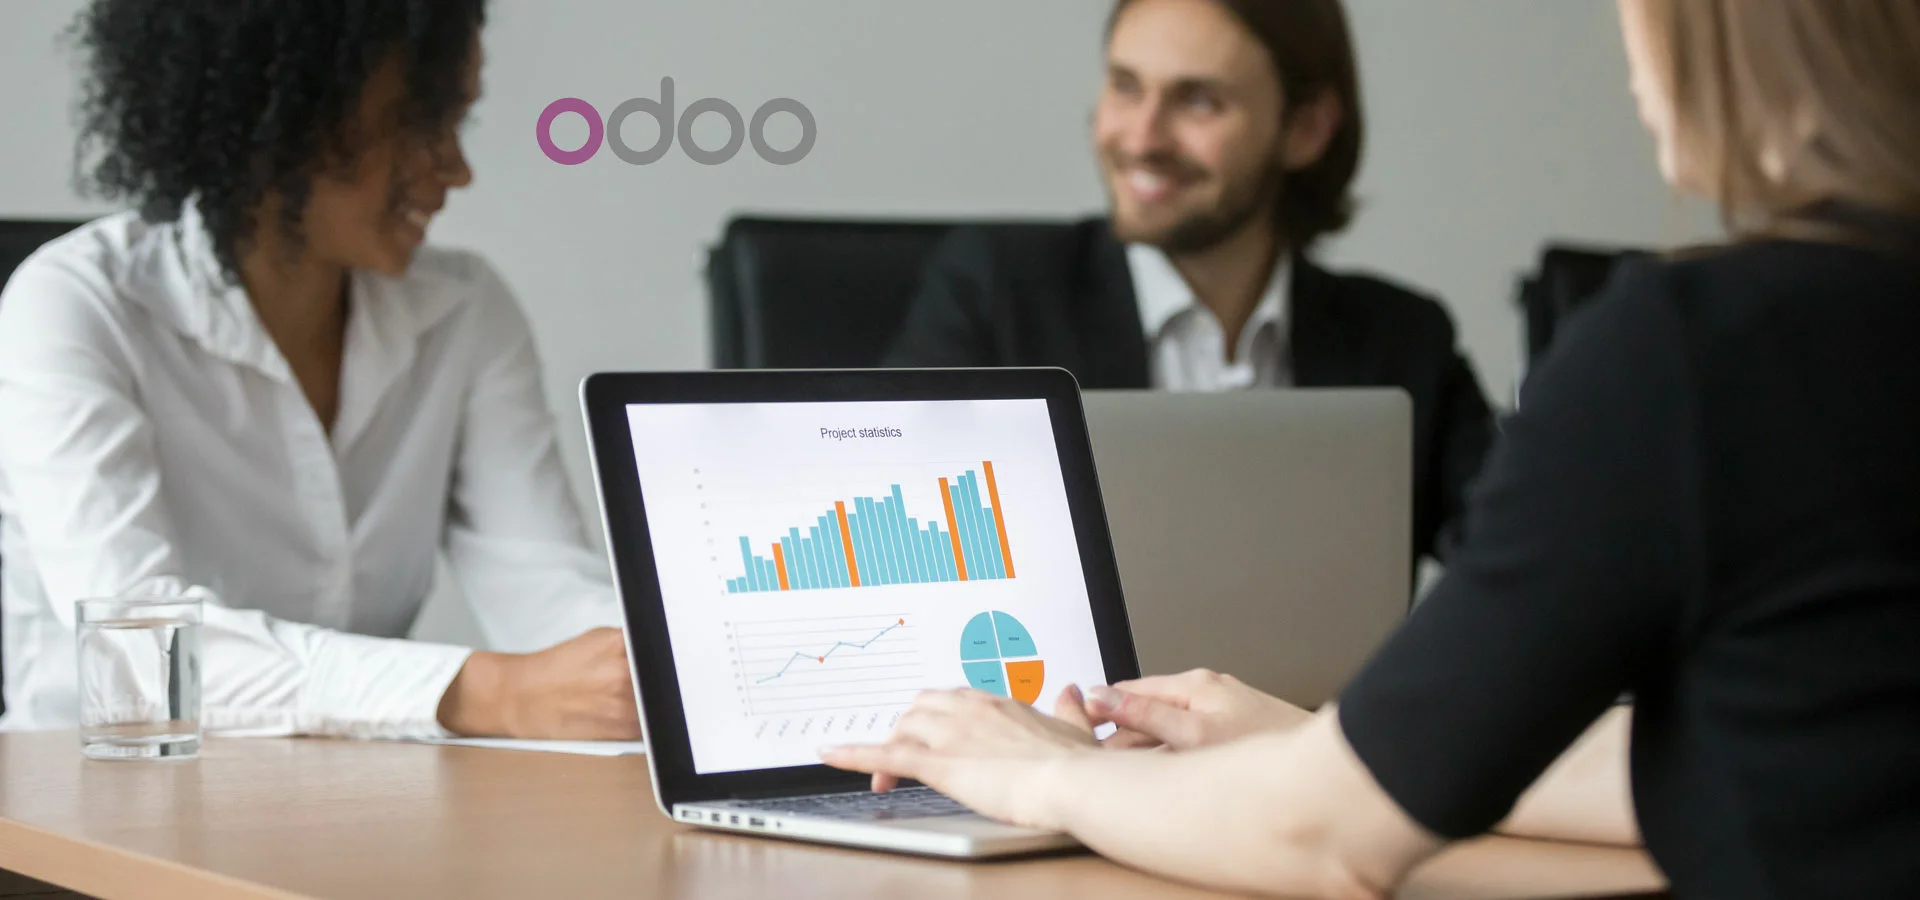 odoo-erp-support-and-services-related-blog-71